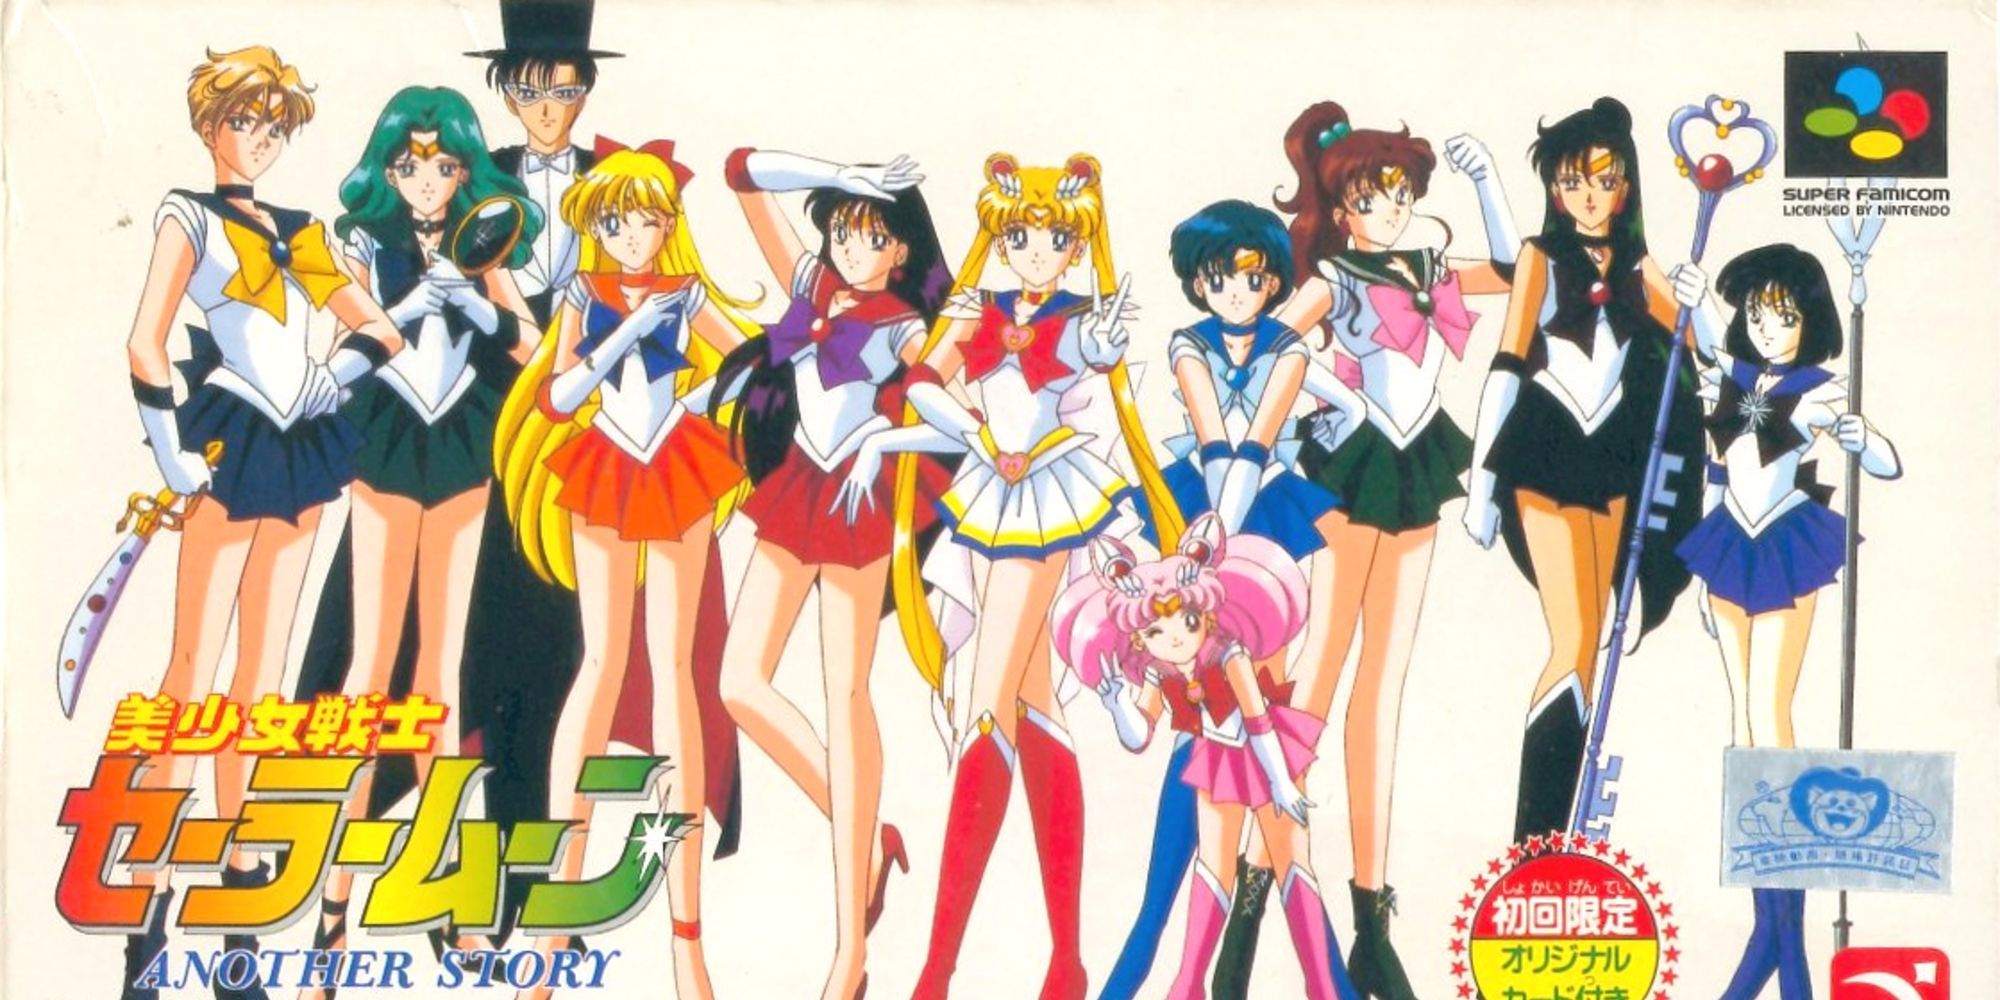 sailor moon another story snes